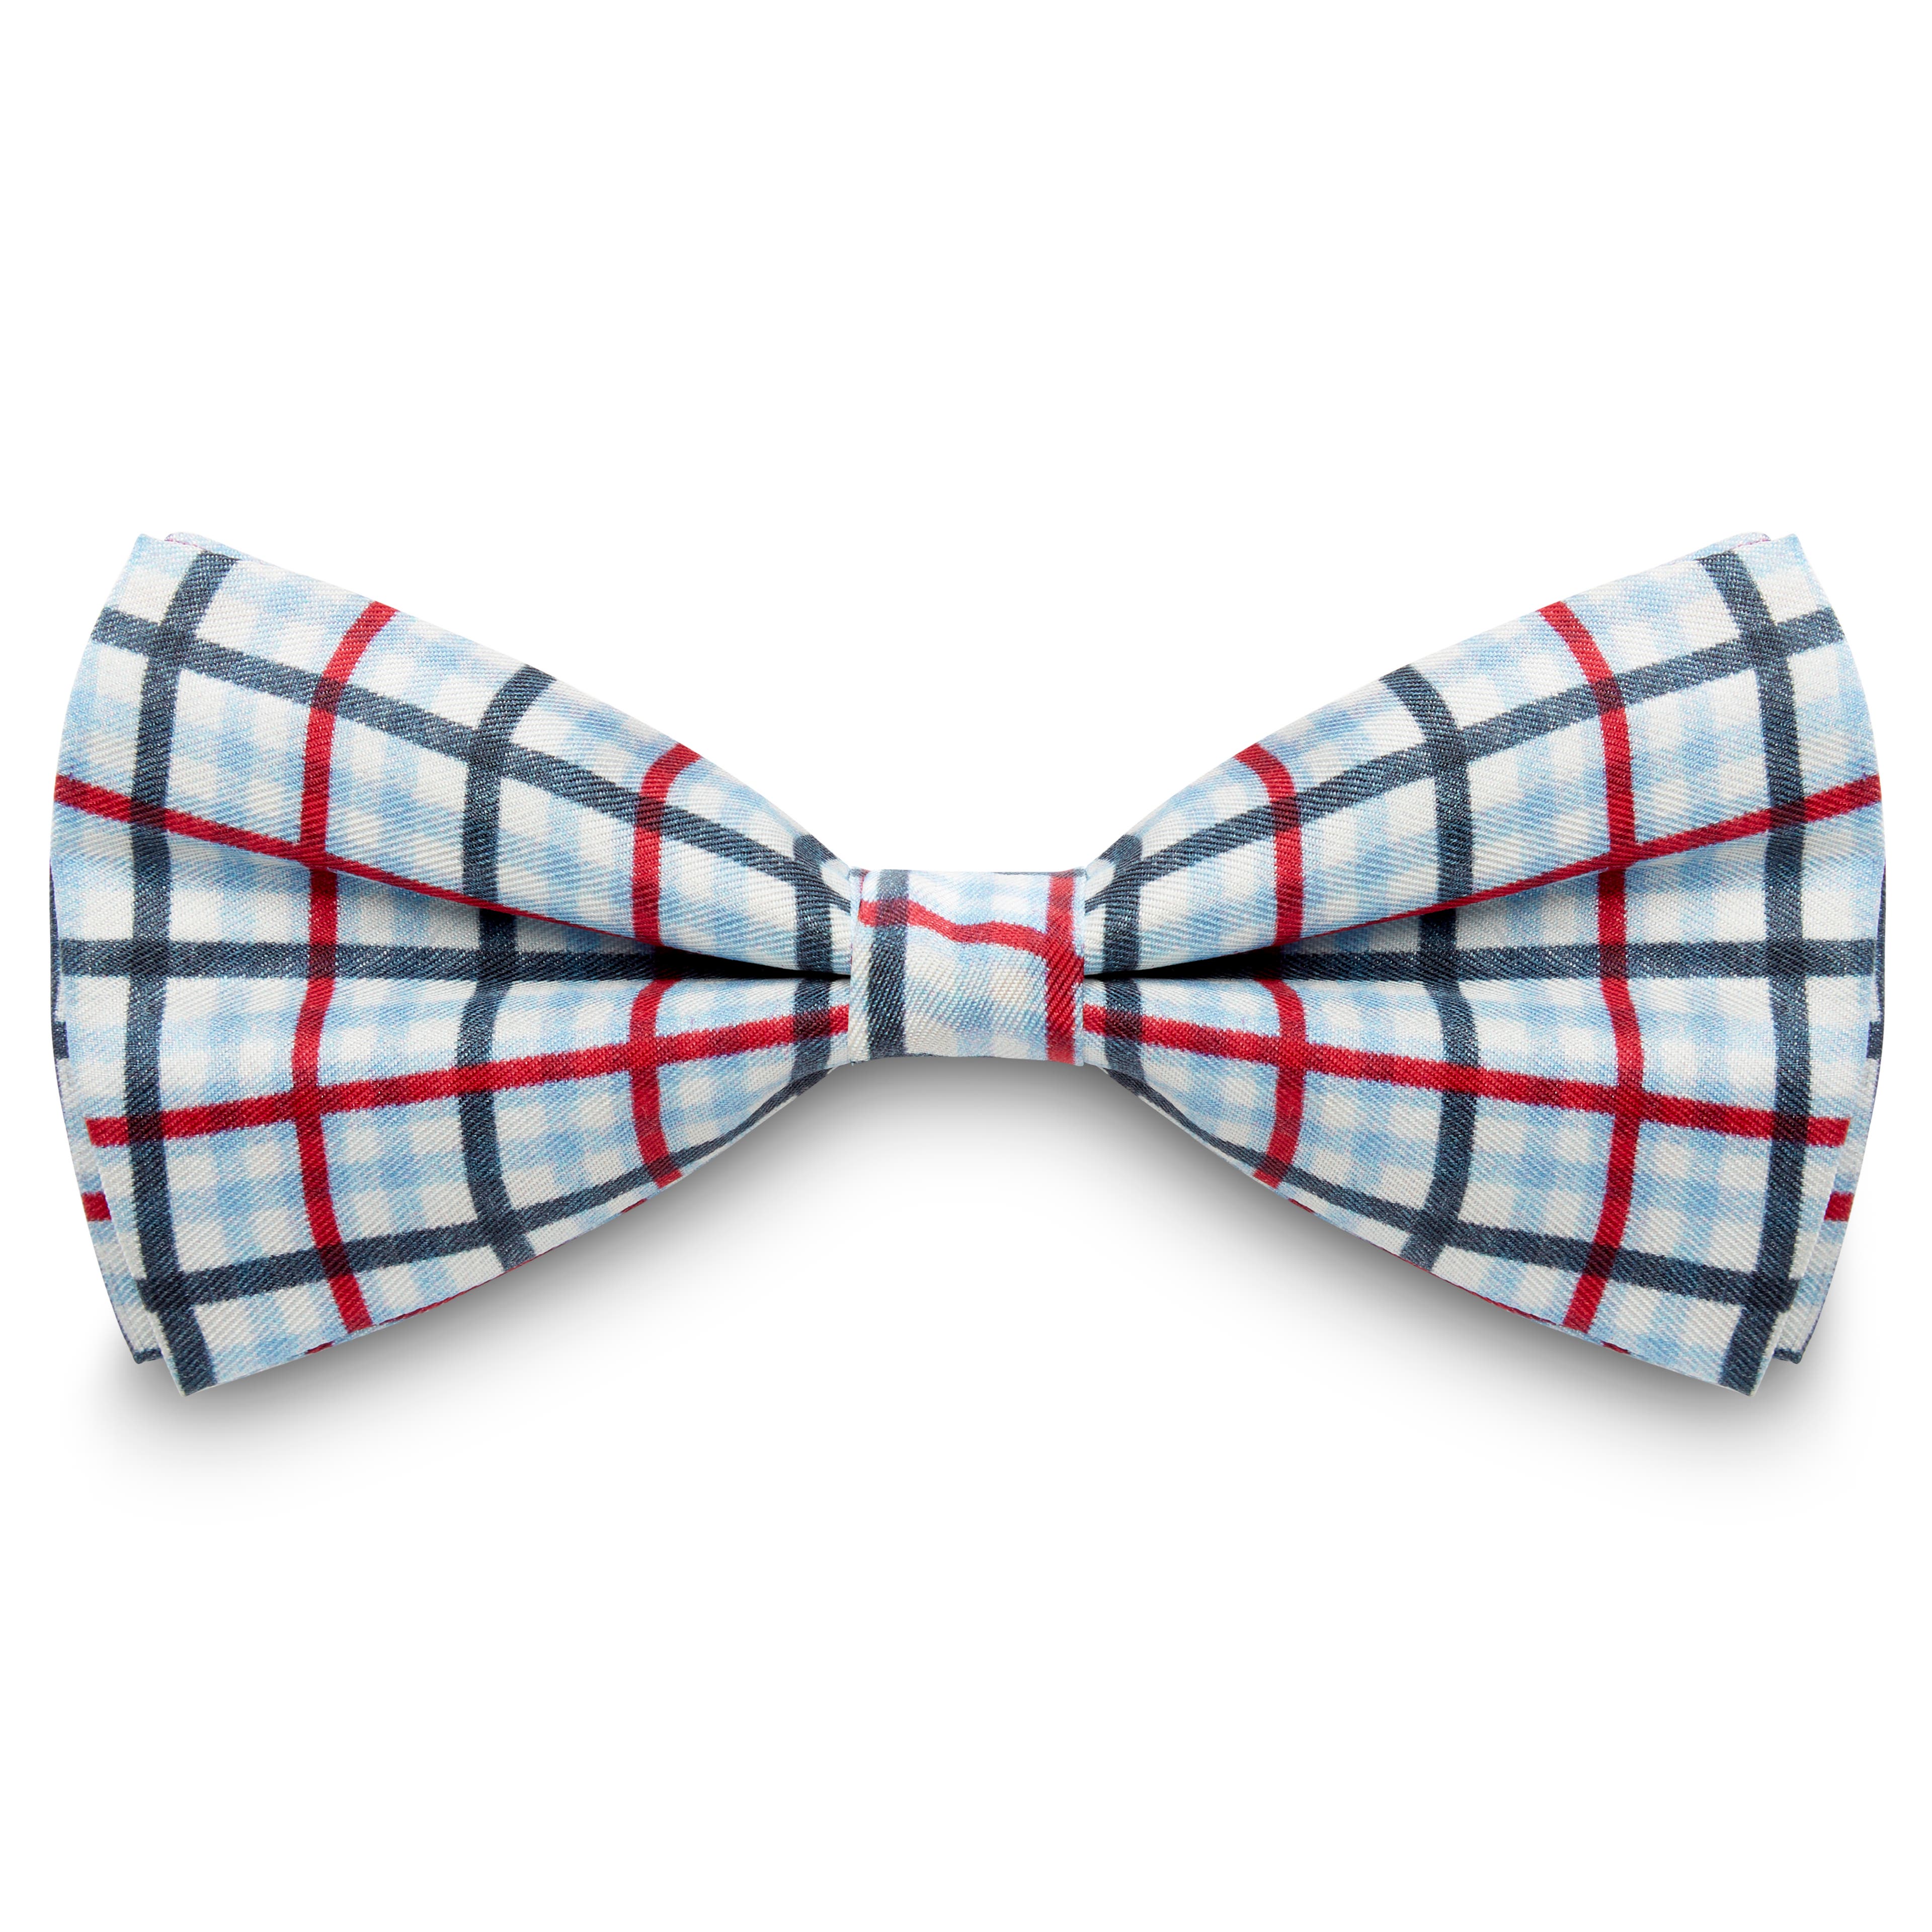 White, Royal Blue & Burgundy Thin Chequered Silk Pre-Tied Bow Tie